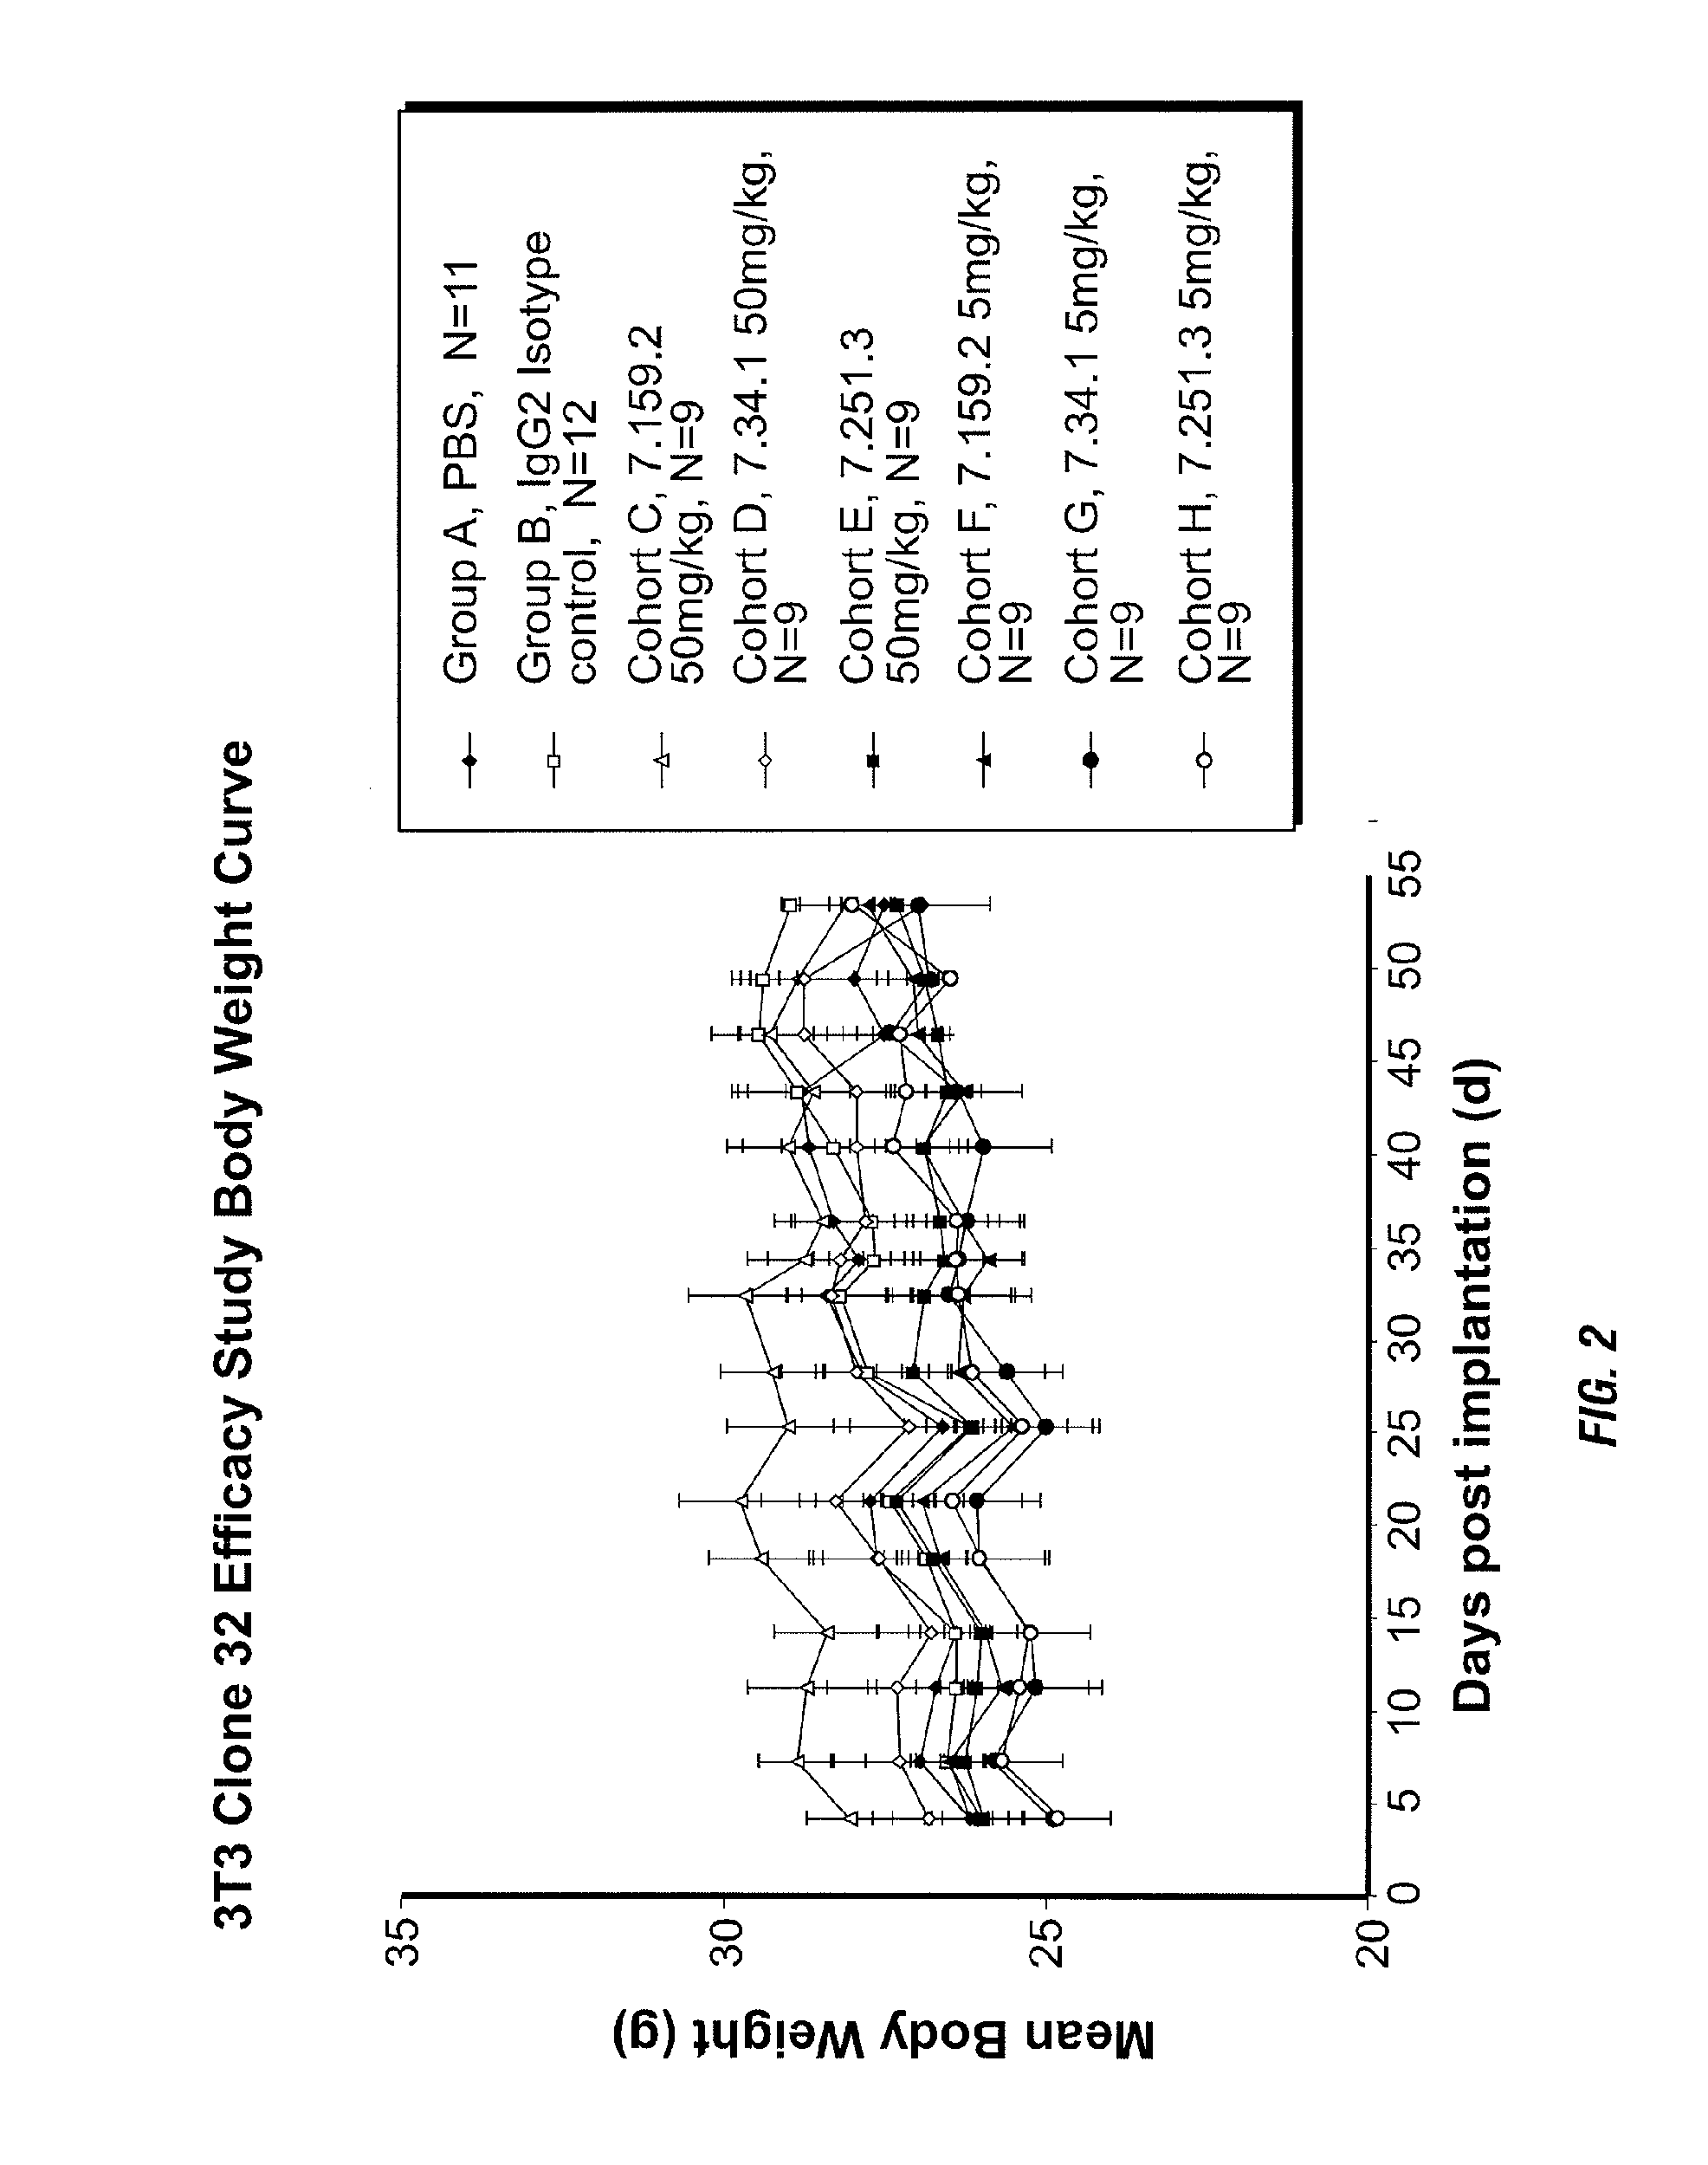 Binding proteins specific for insulin-like growth factors and uses thereof